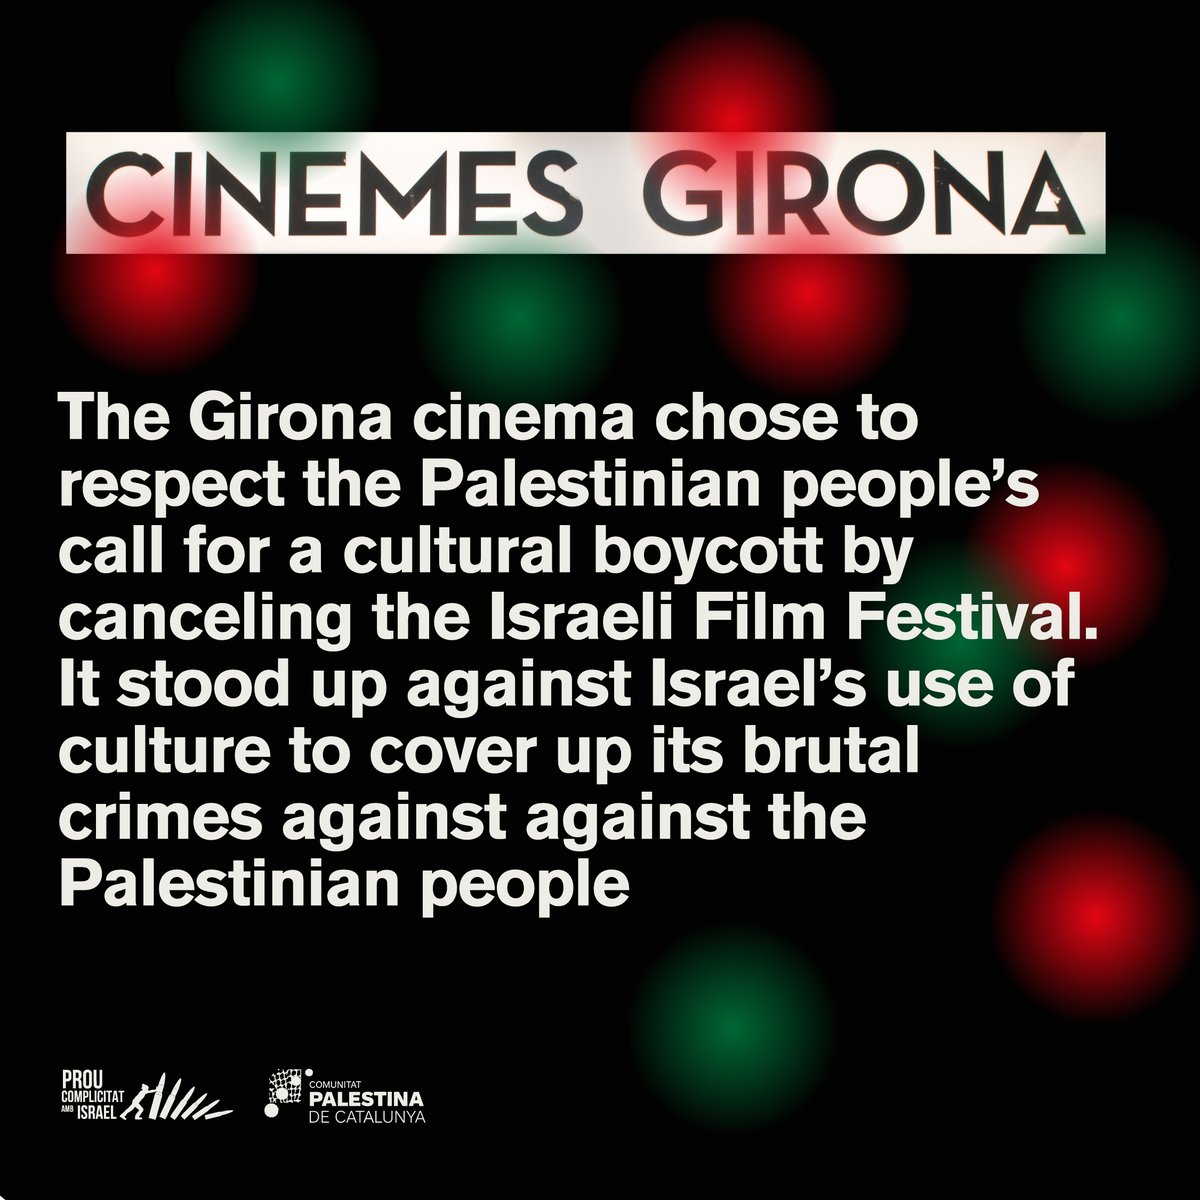 BDS VICTORY! @Cinemes_Girona has chosen to respect the Palestinian people’s call for a cultural boycott by canceling the Seret Israeli Film Festival. 

Cinemes Girona has stood up against Israel’s use of culture to cover up its brutal crimes against the Palestinian people.